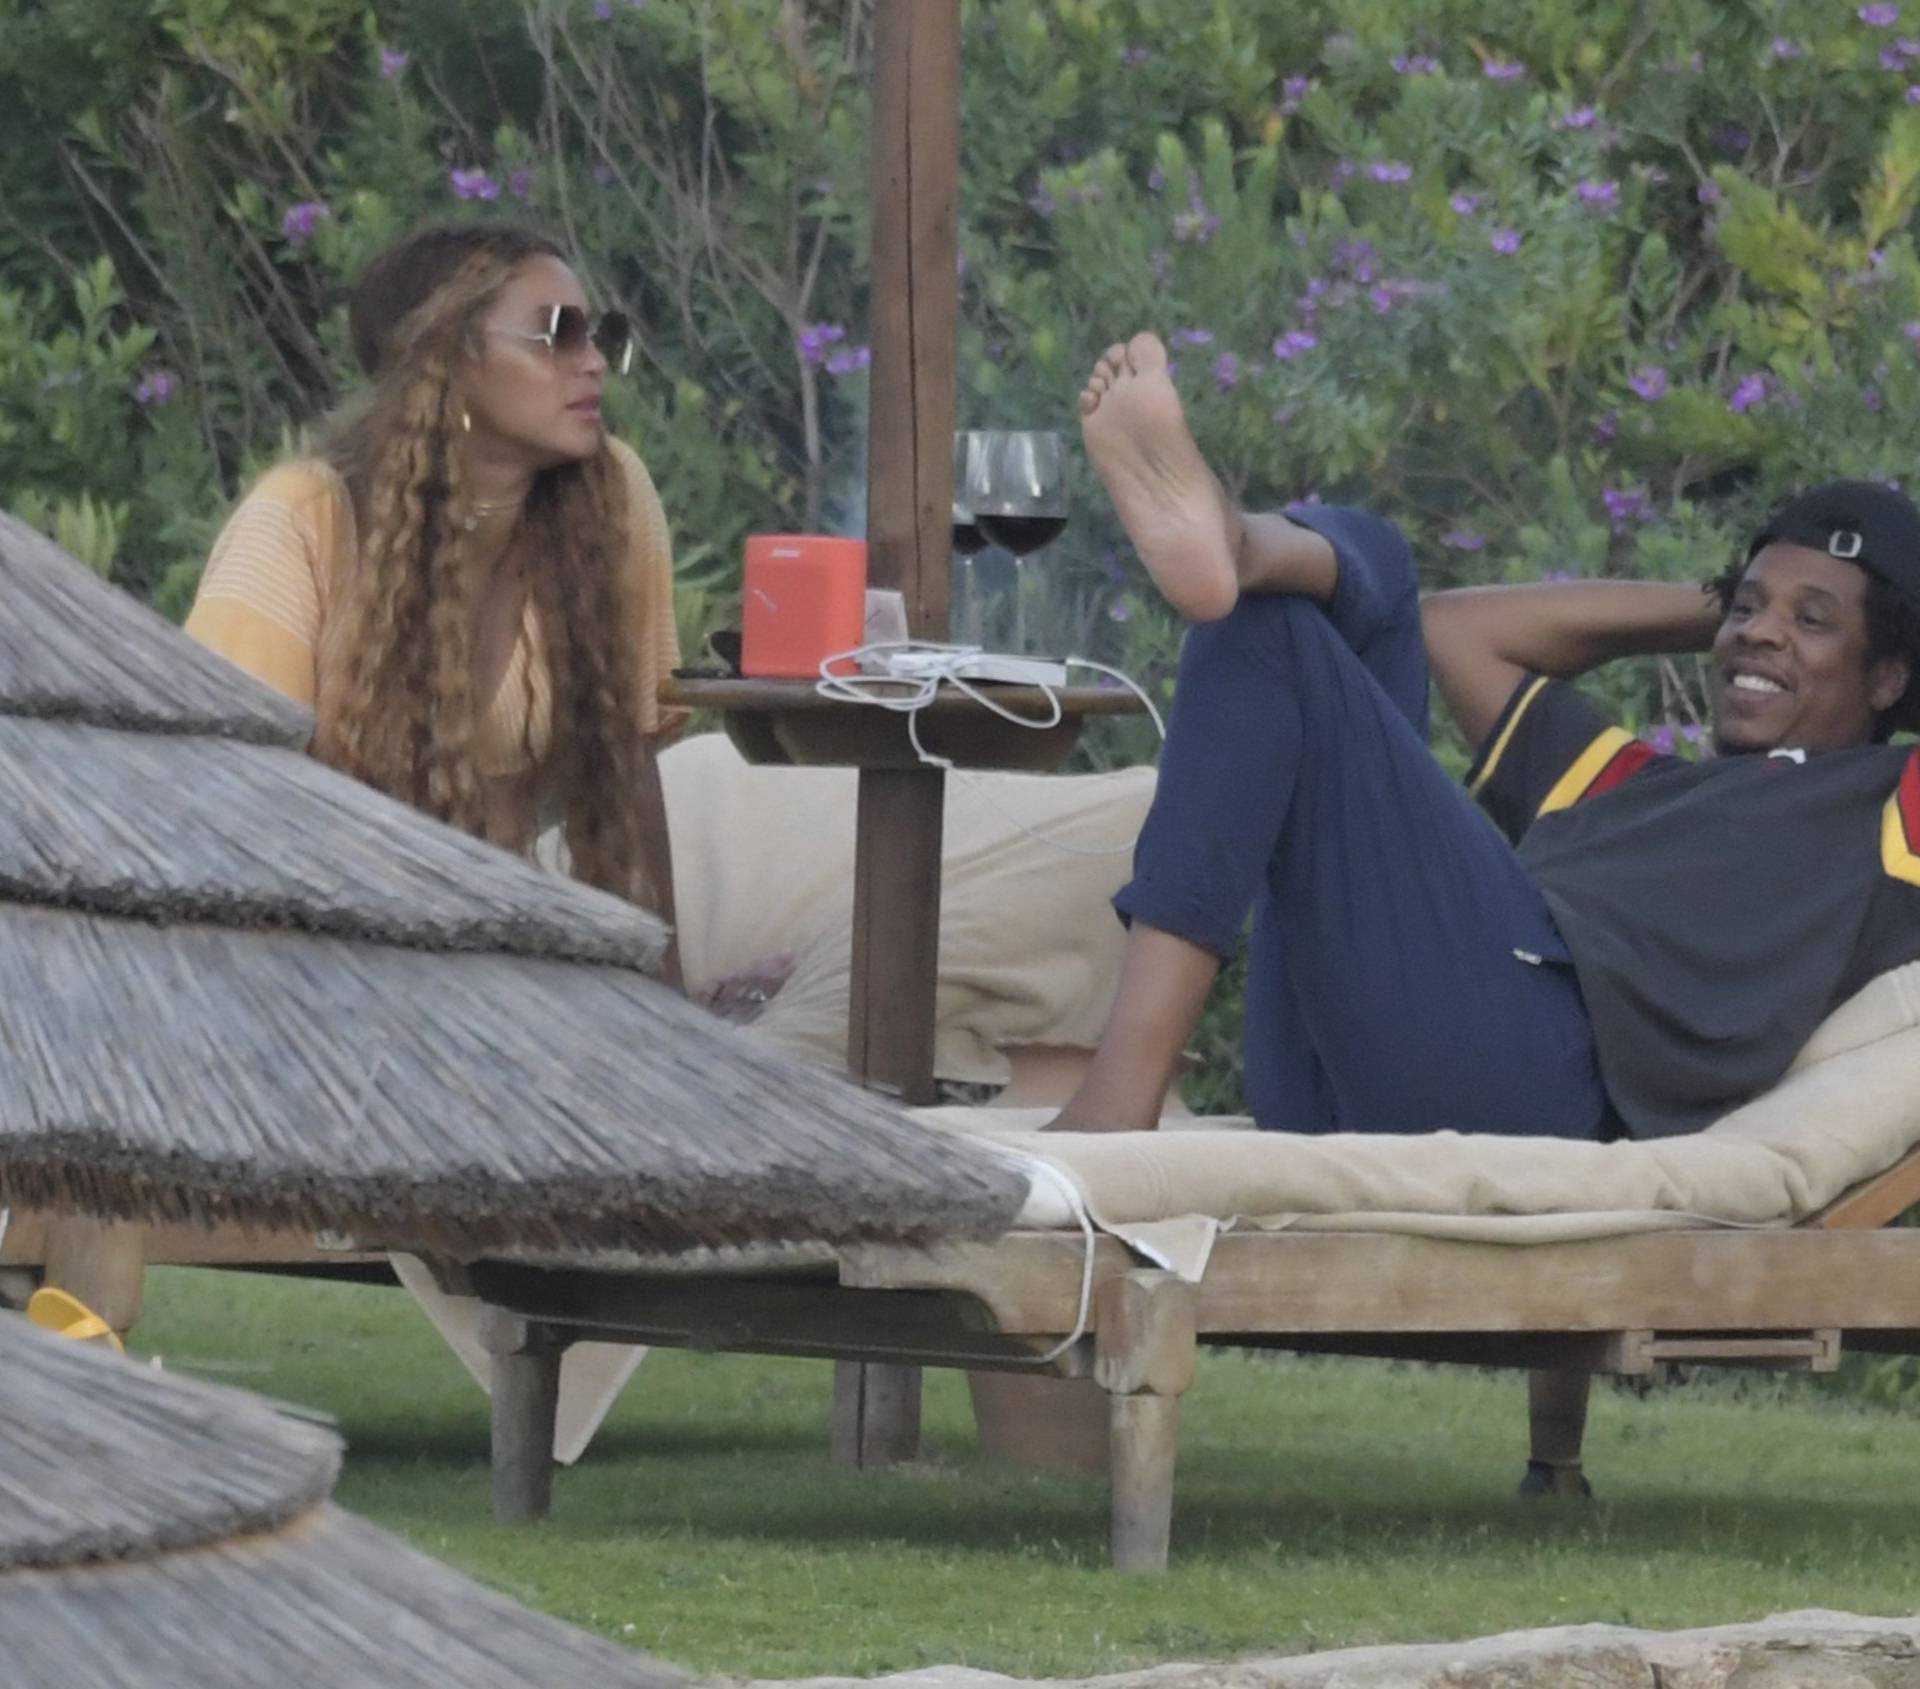 Beyonce and Jay Z enjoy a glass of wine together as they continue their Italian vacation